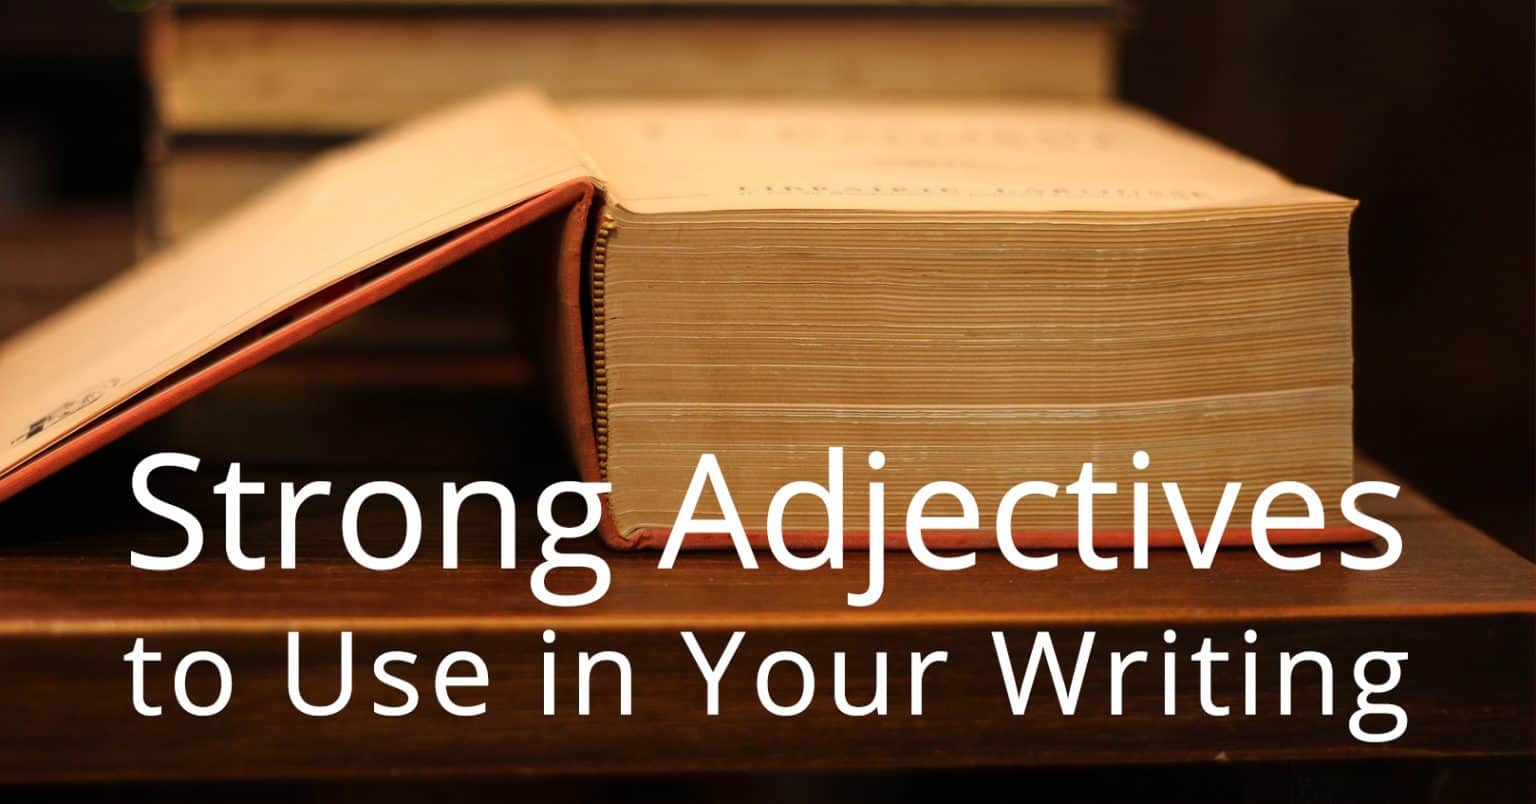 strong-adjectives-to-use-in-your-writing-book-cave